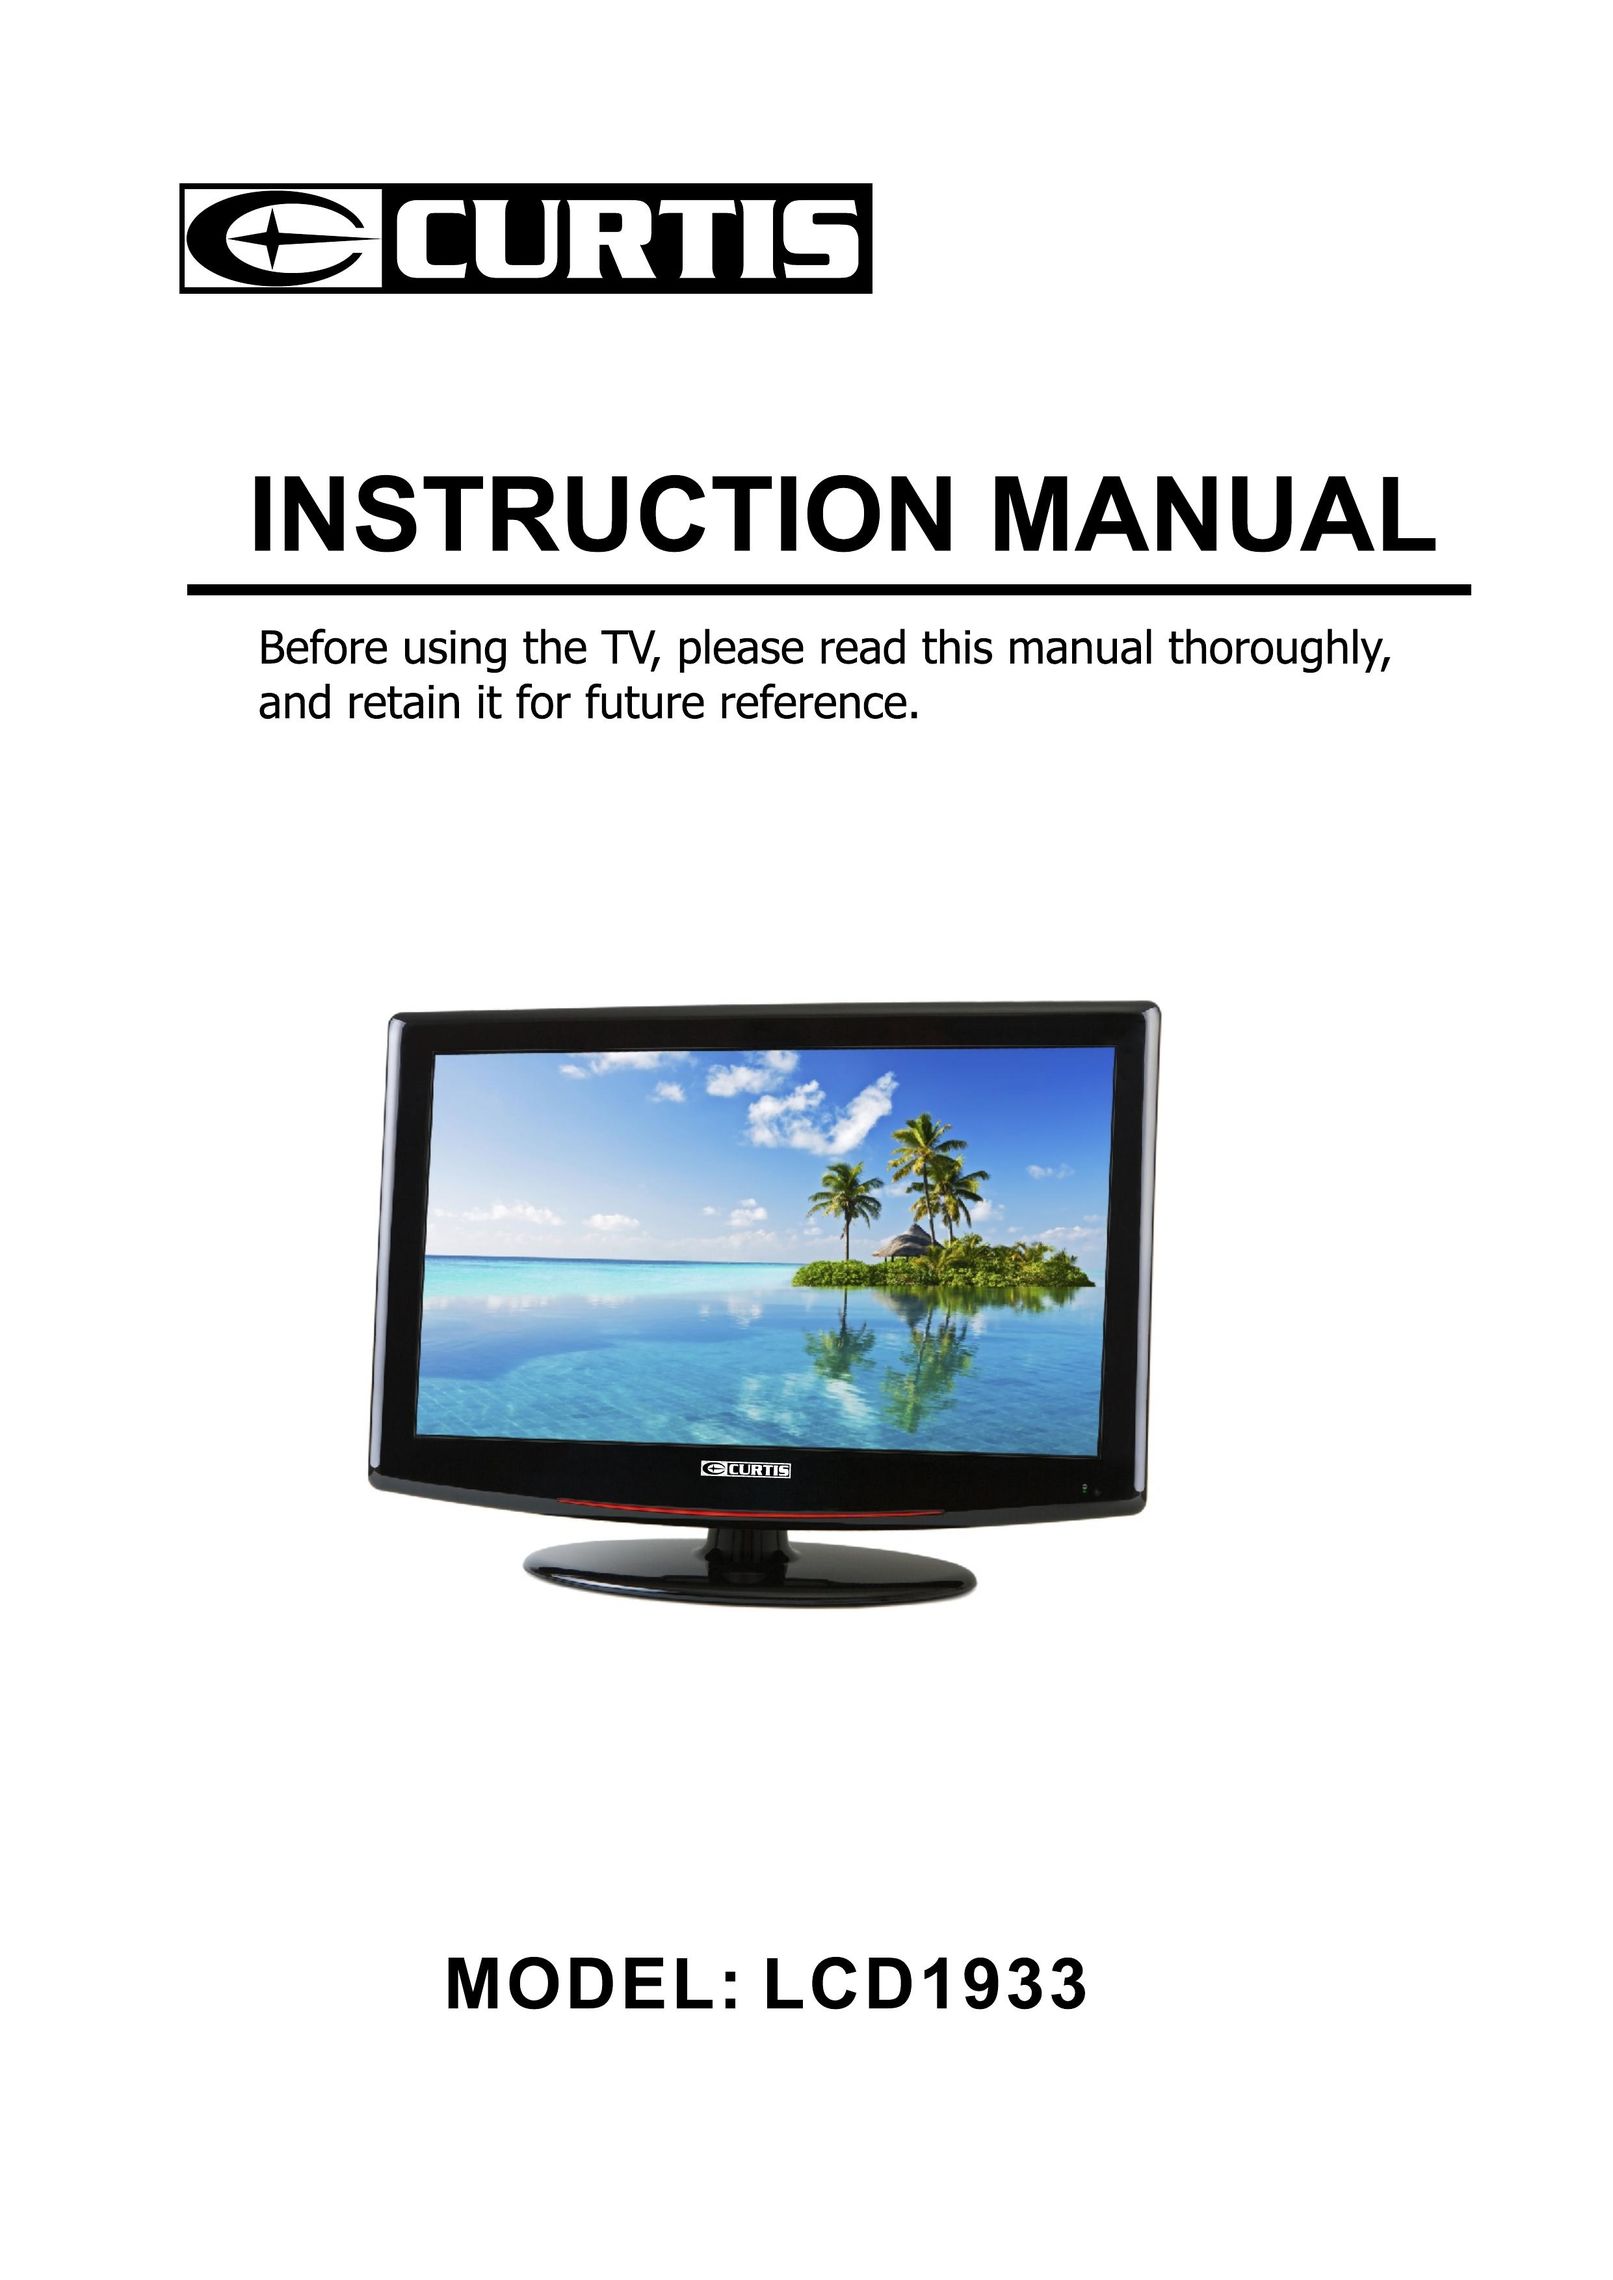 Curtis LCD1933 Flat Panel Television User Manual